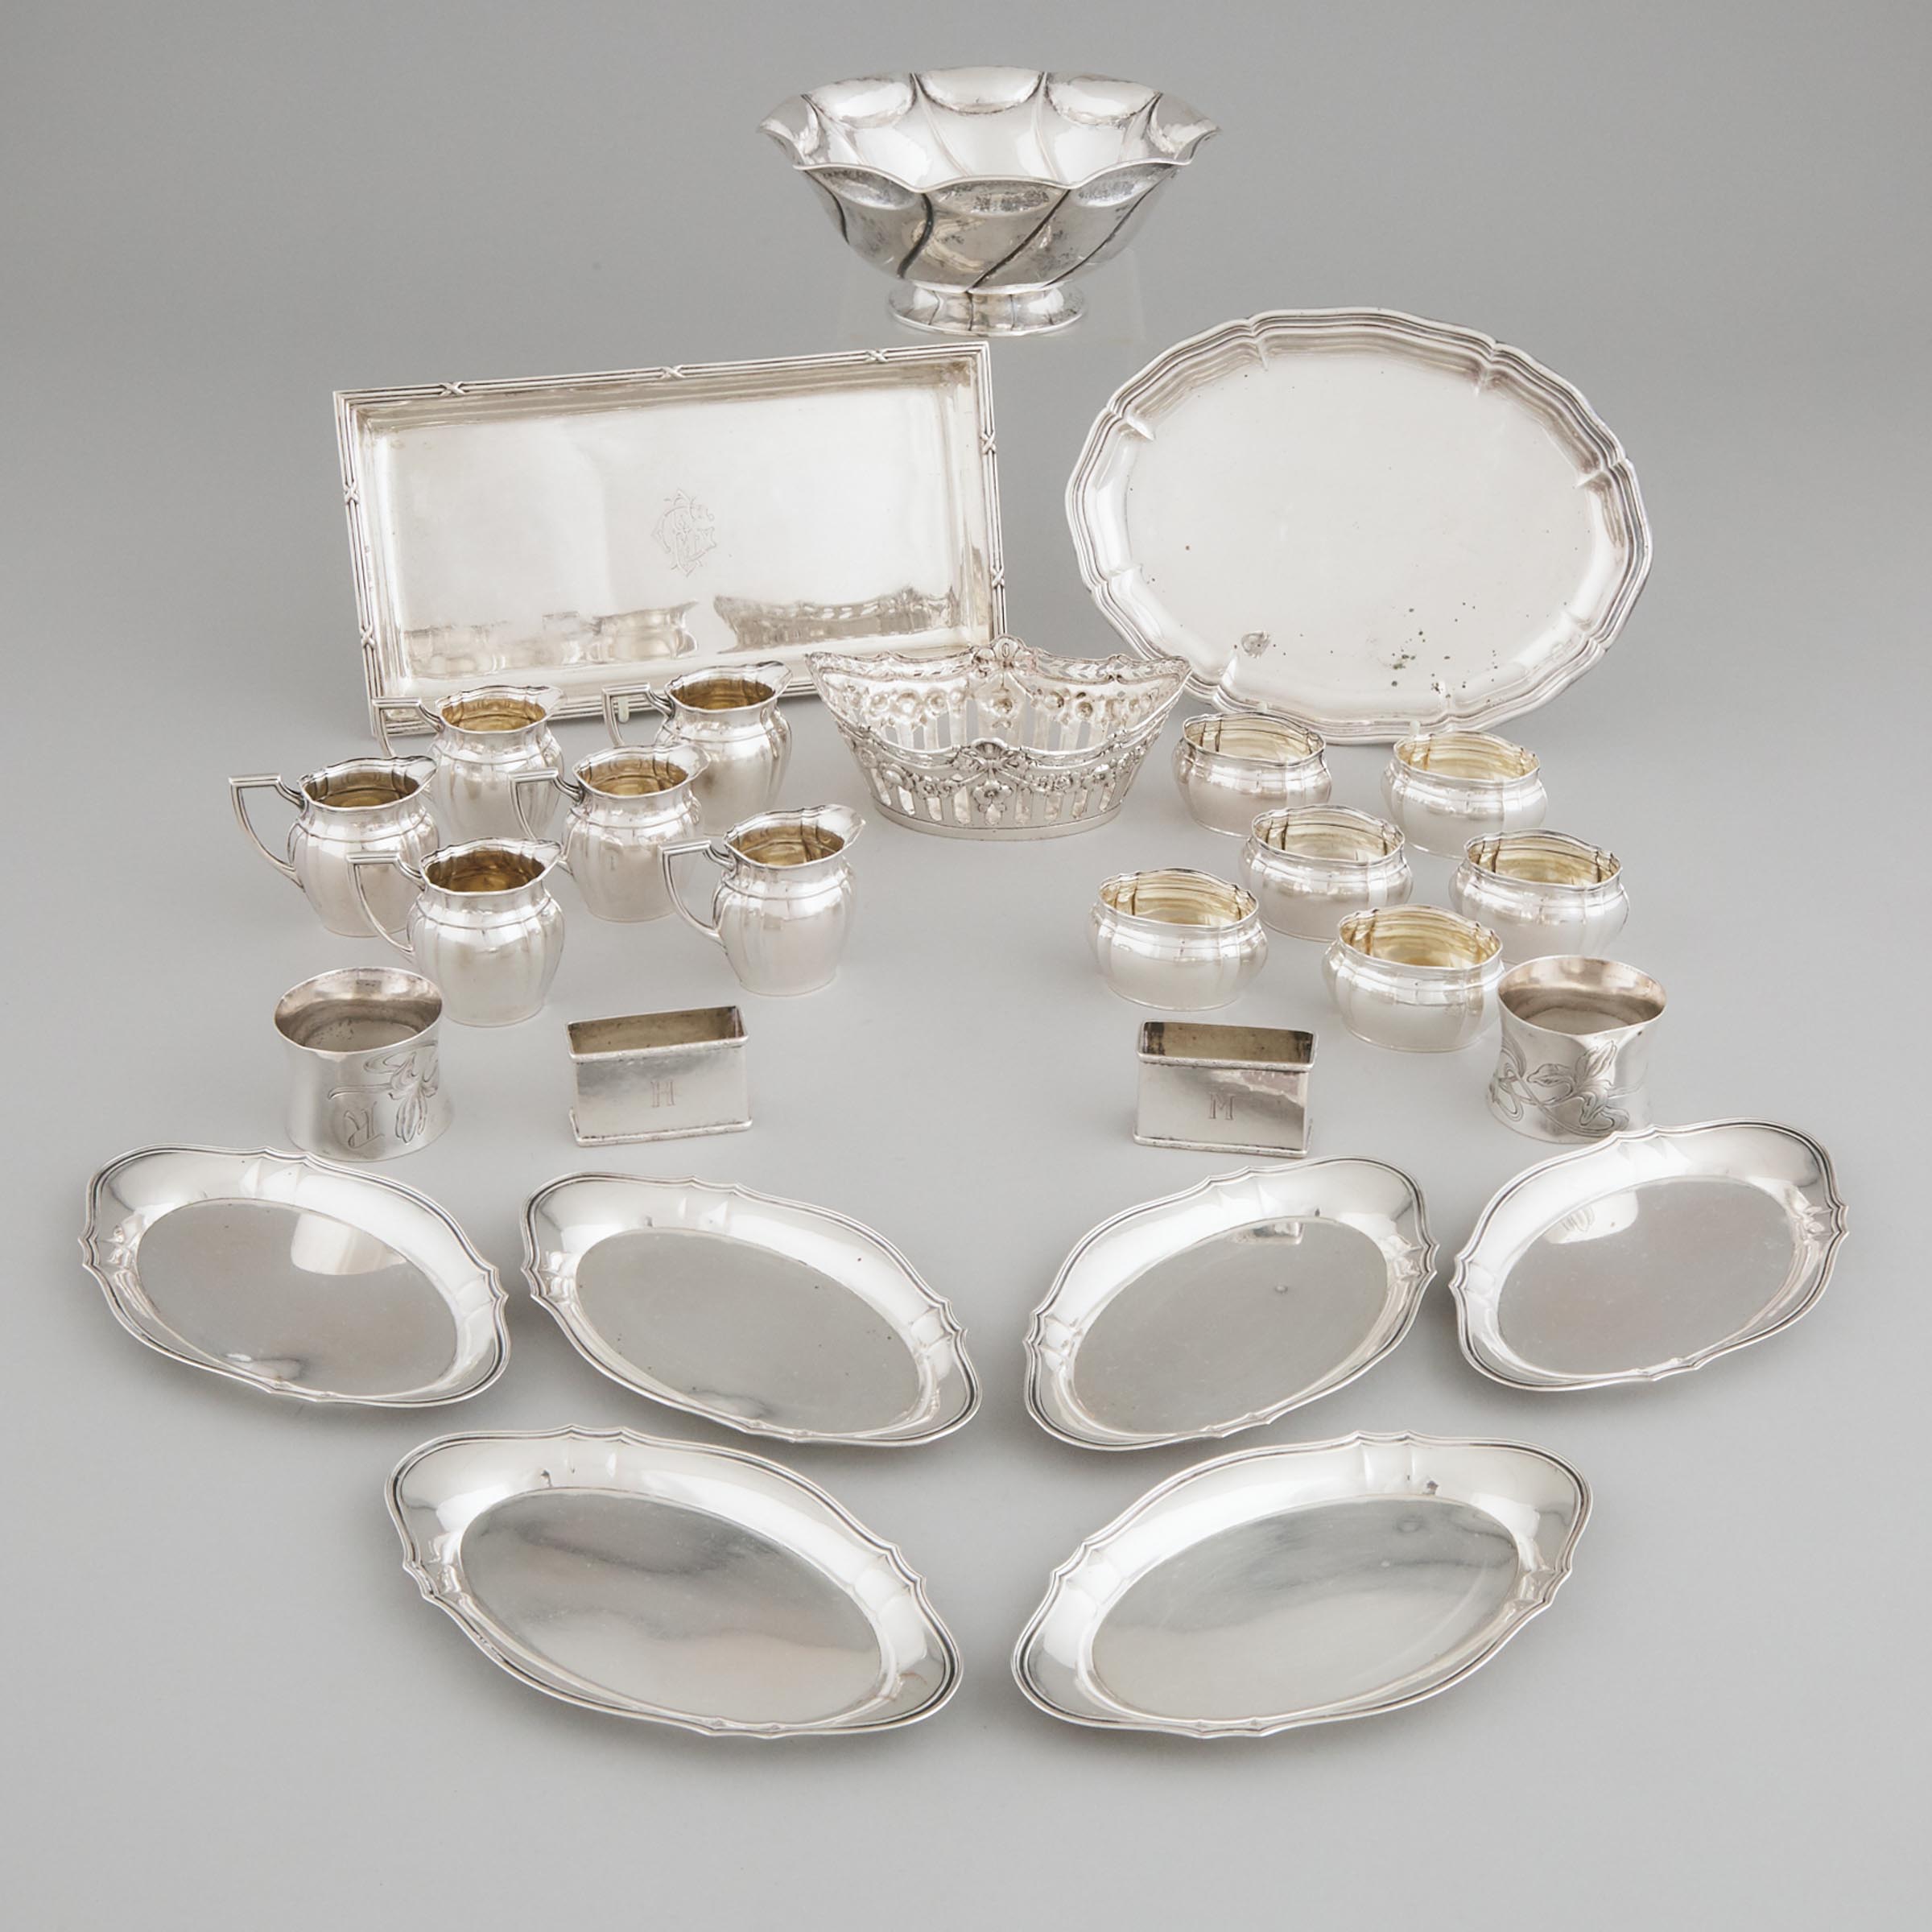 Group of German Silver, 20th century